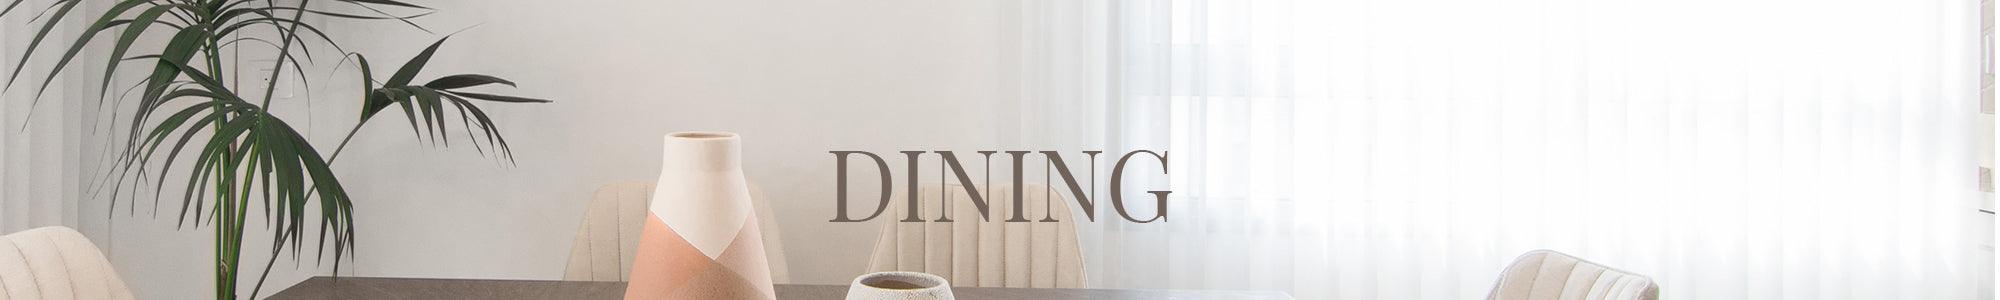 Dining - House Journey